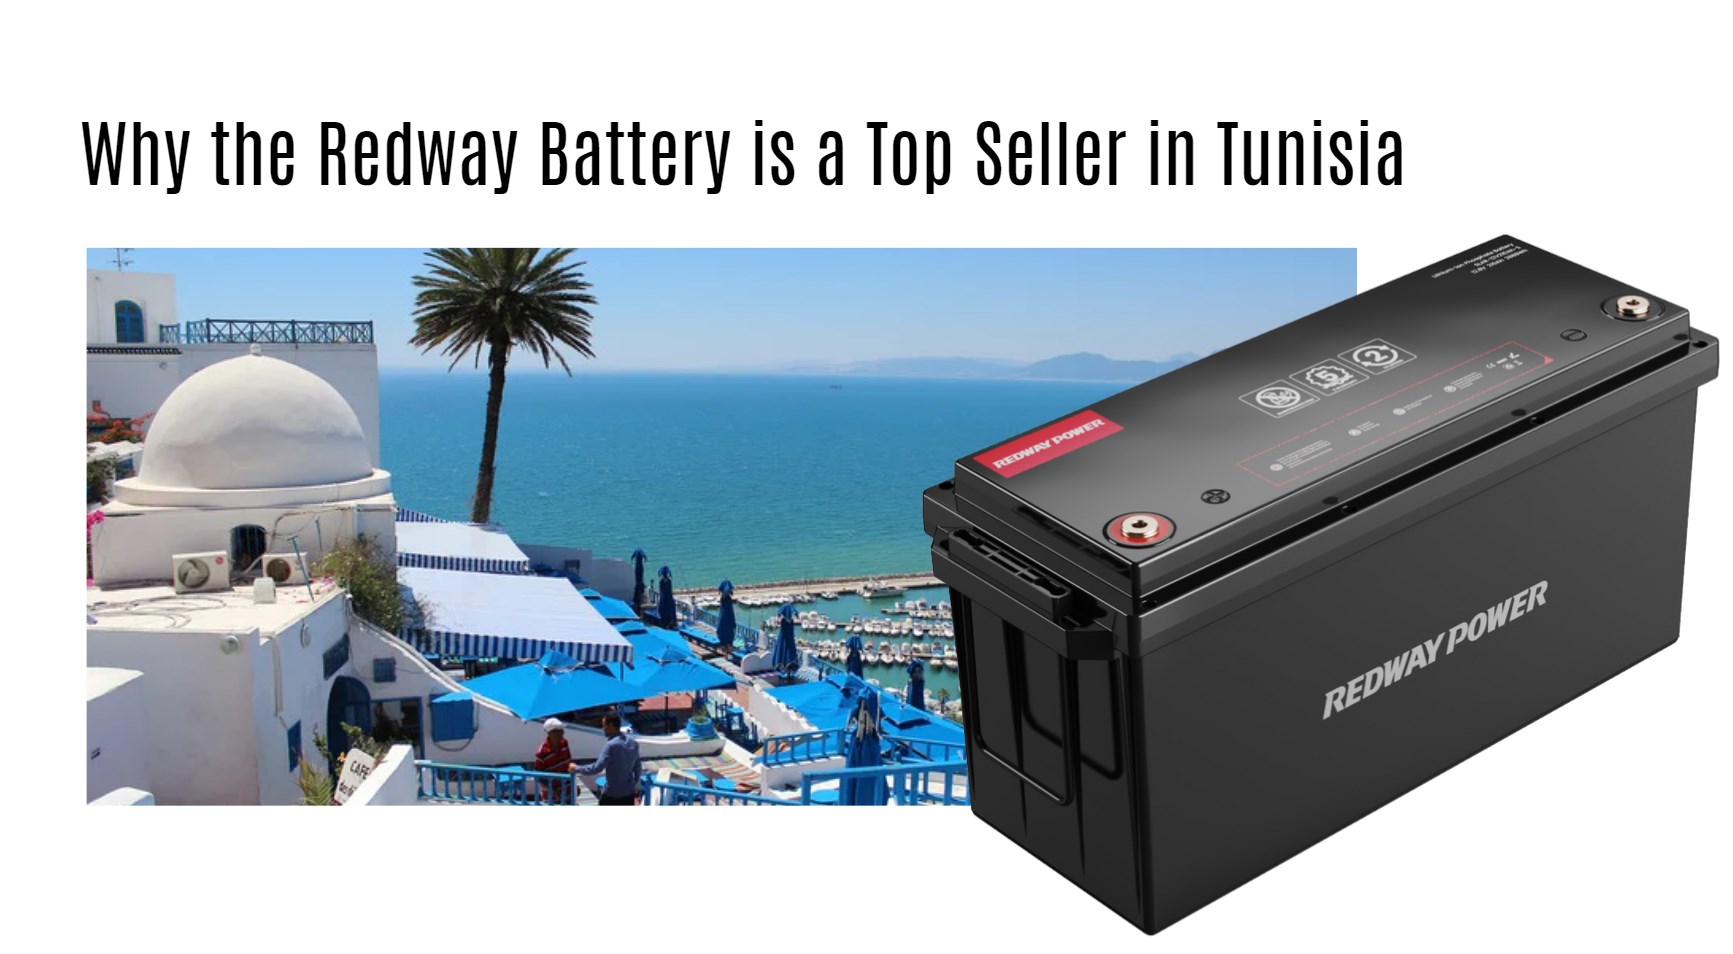 Why the Redway Battery is a Top Seller in Tunisia